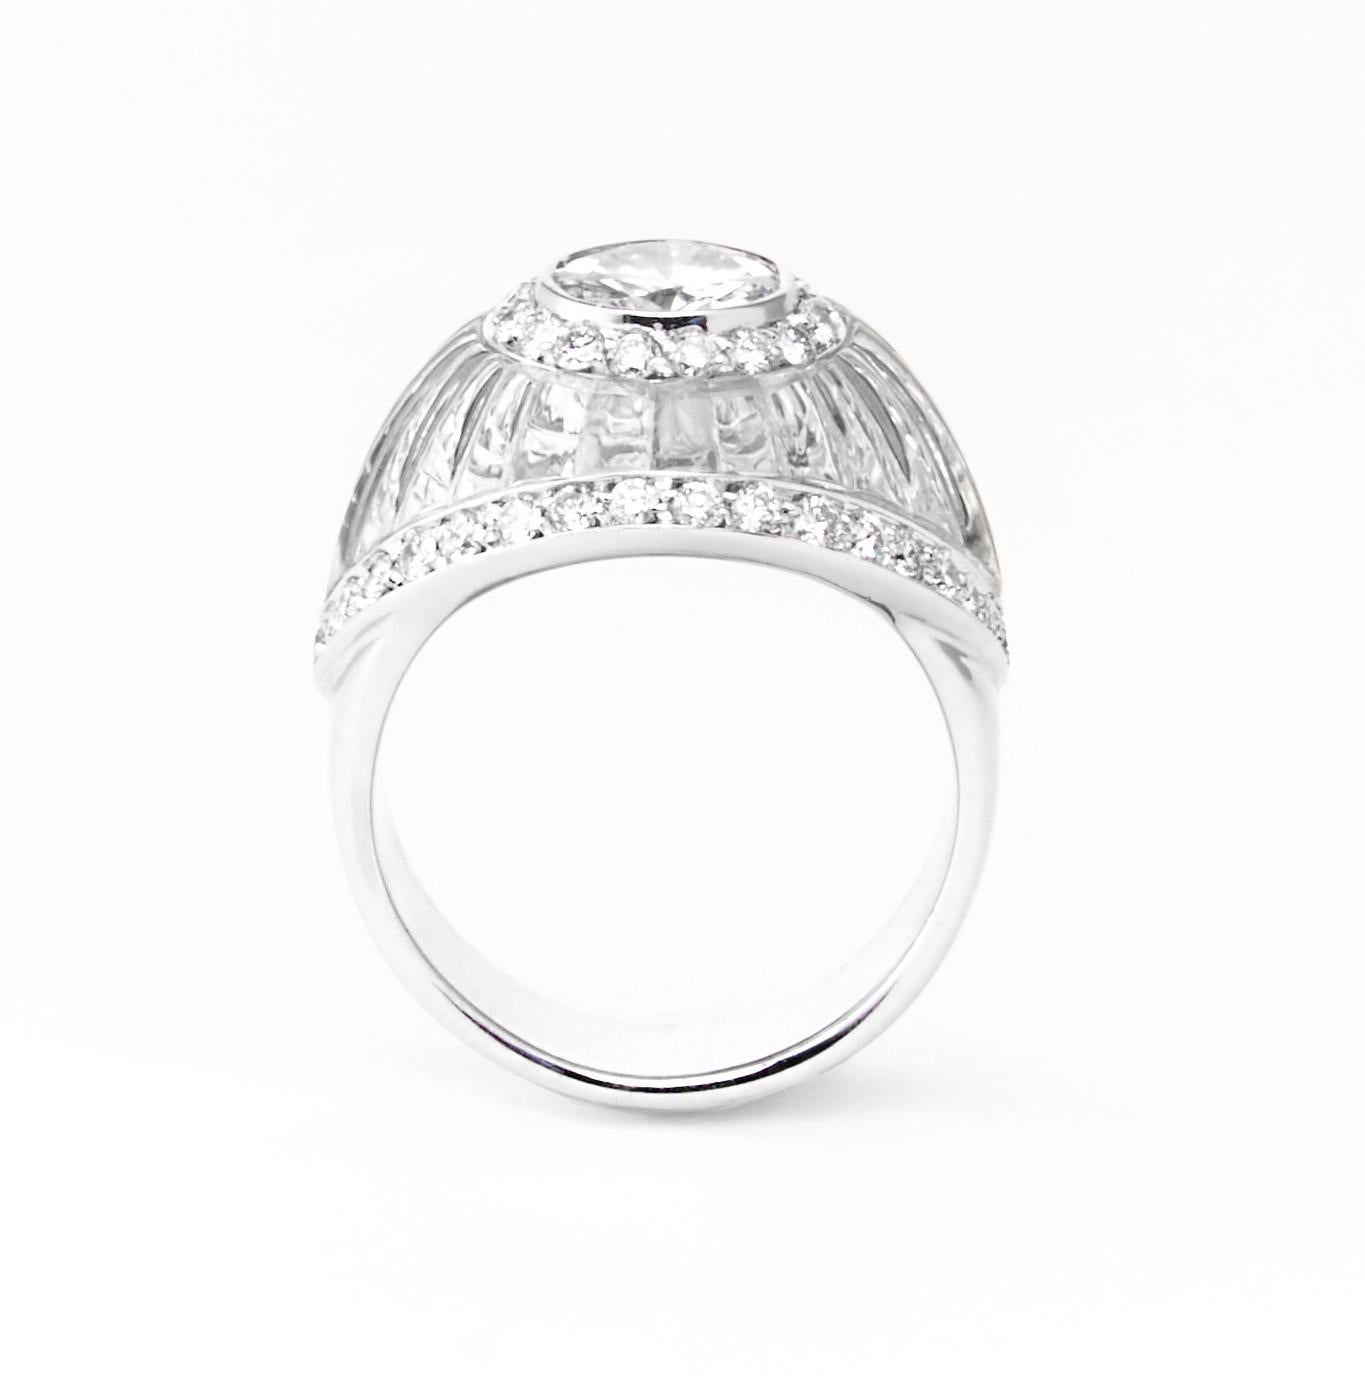 Elevate your sense of luxury with this Italian-crafted ring by the esteemed jeweler Fulvio Maria Scavia. A focal point of this exquisite piece is a dazzling white round brilliant cut diamond, artfully set in white gold and surrounded by a delicate